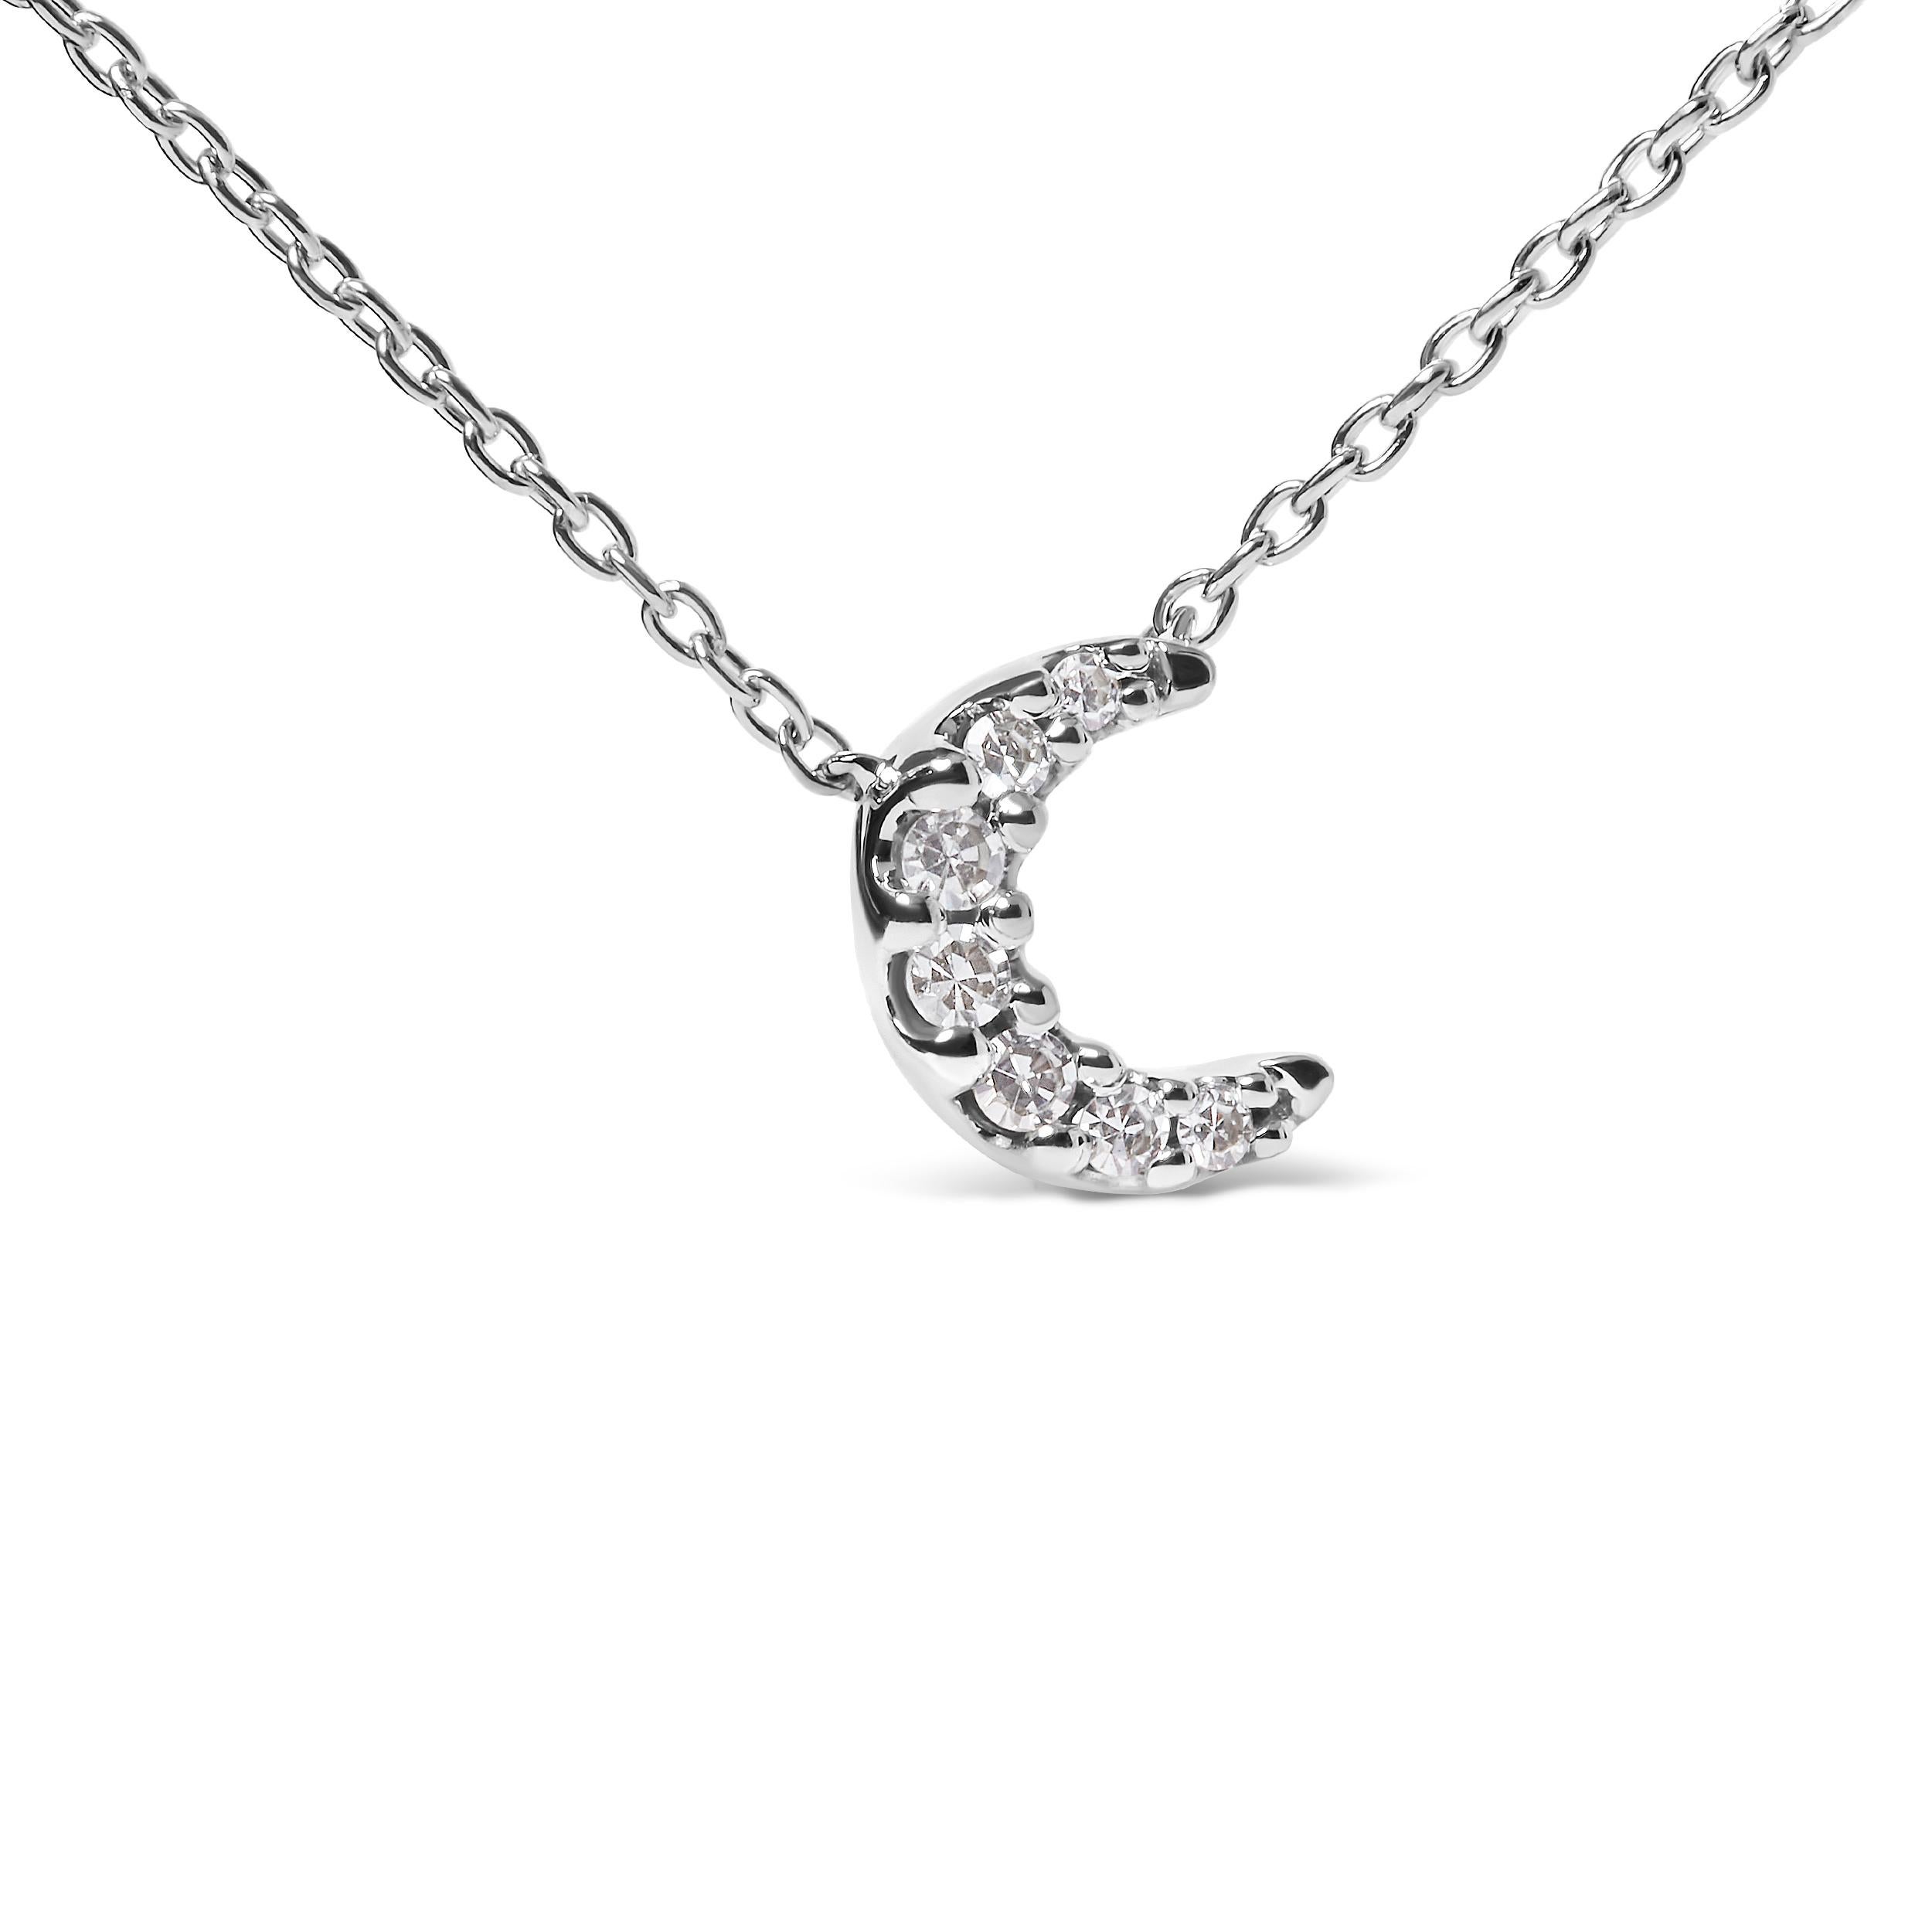 Modern 10K White Gold Diamond Accented Crescent Moon Shaped 18